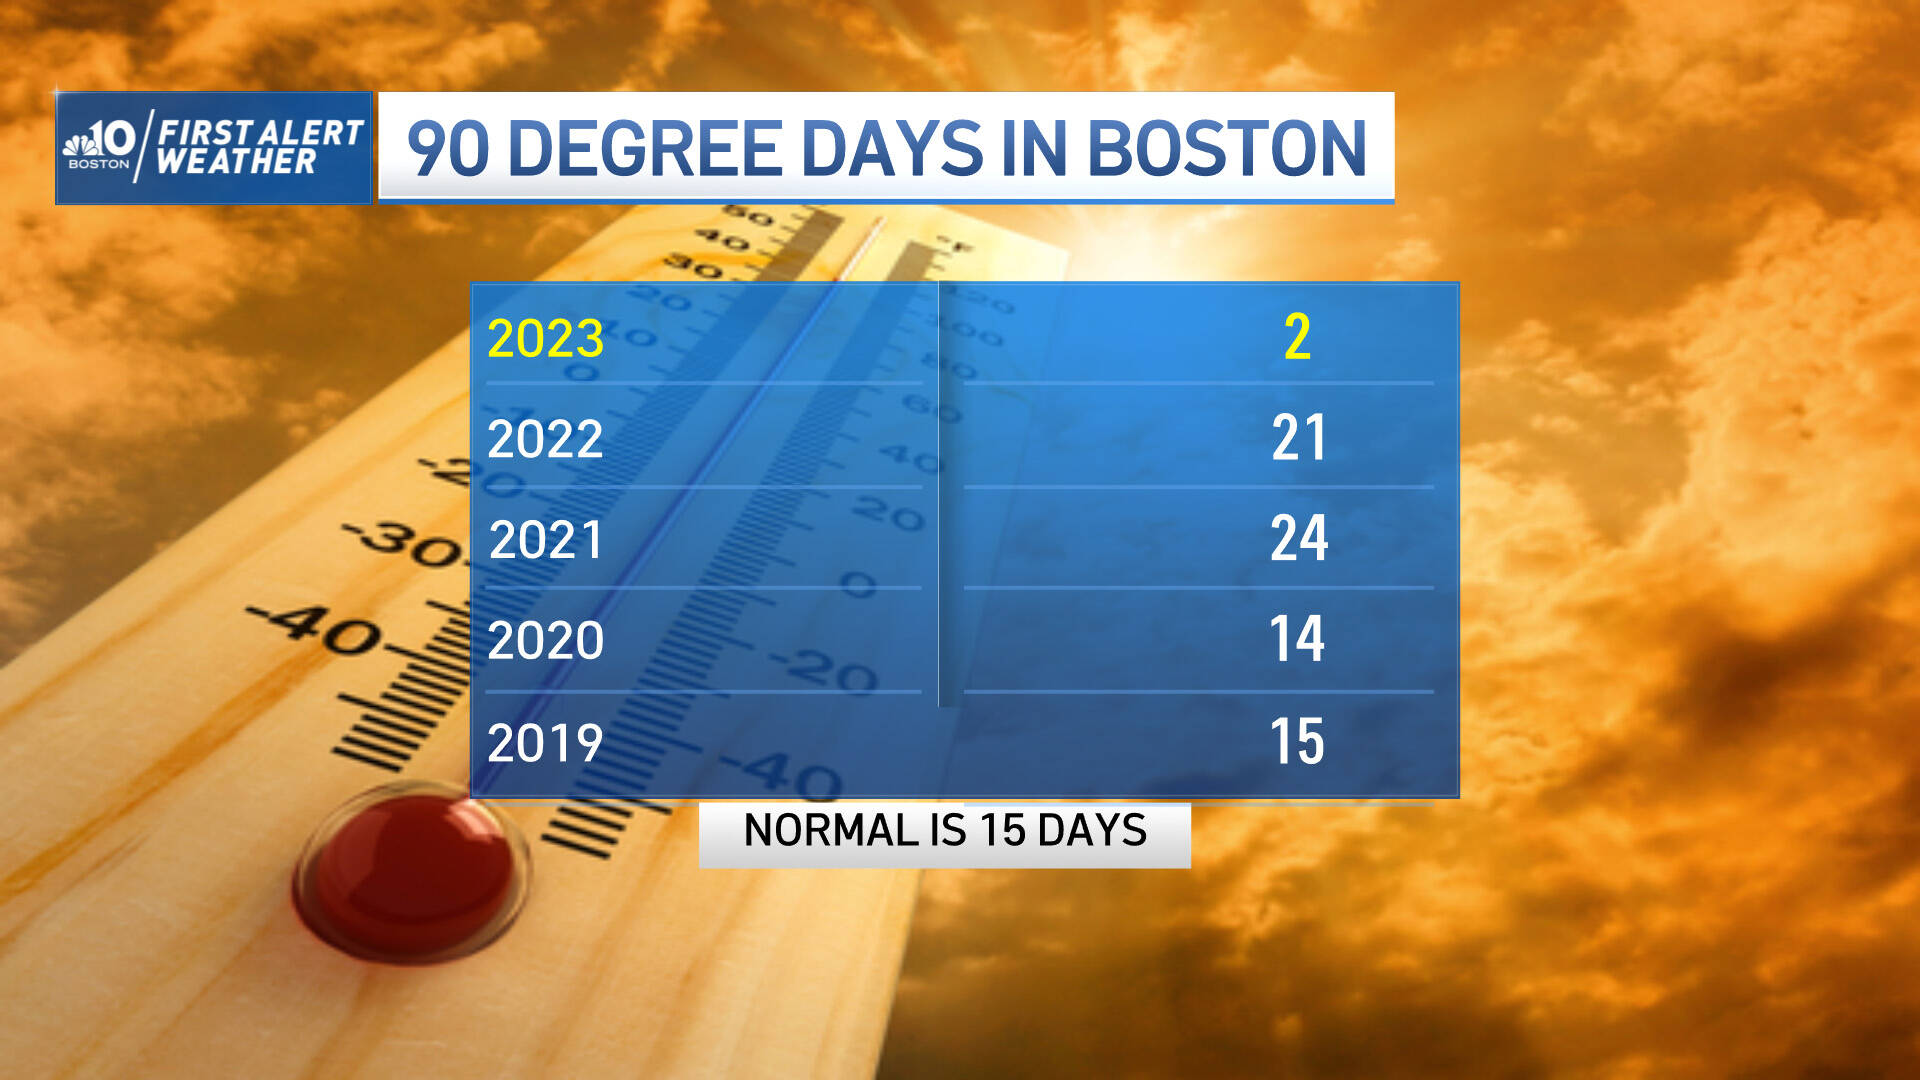 The number of 90 degree days over the past five years. (Courtesy NBC Boston)